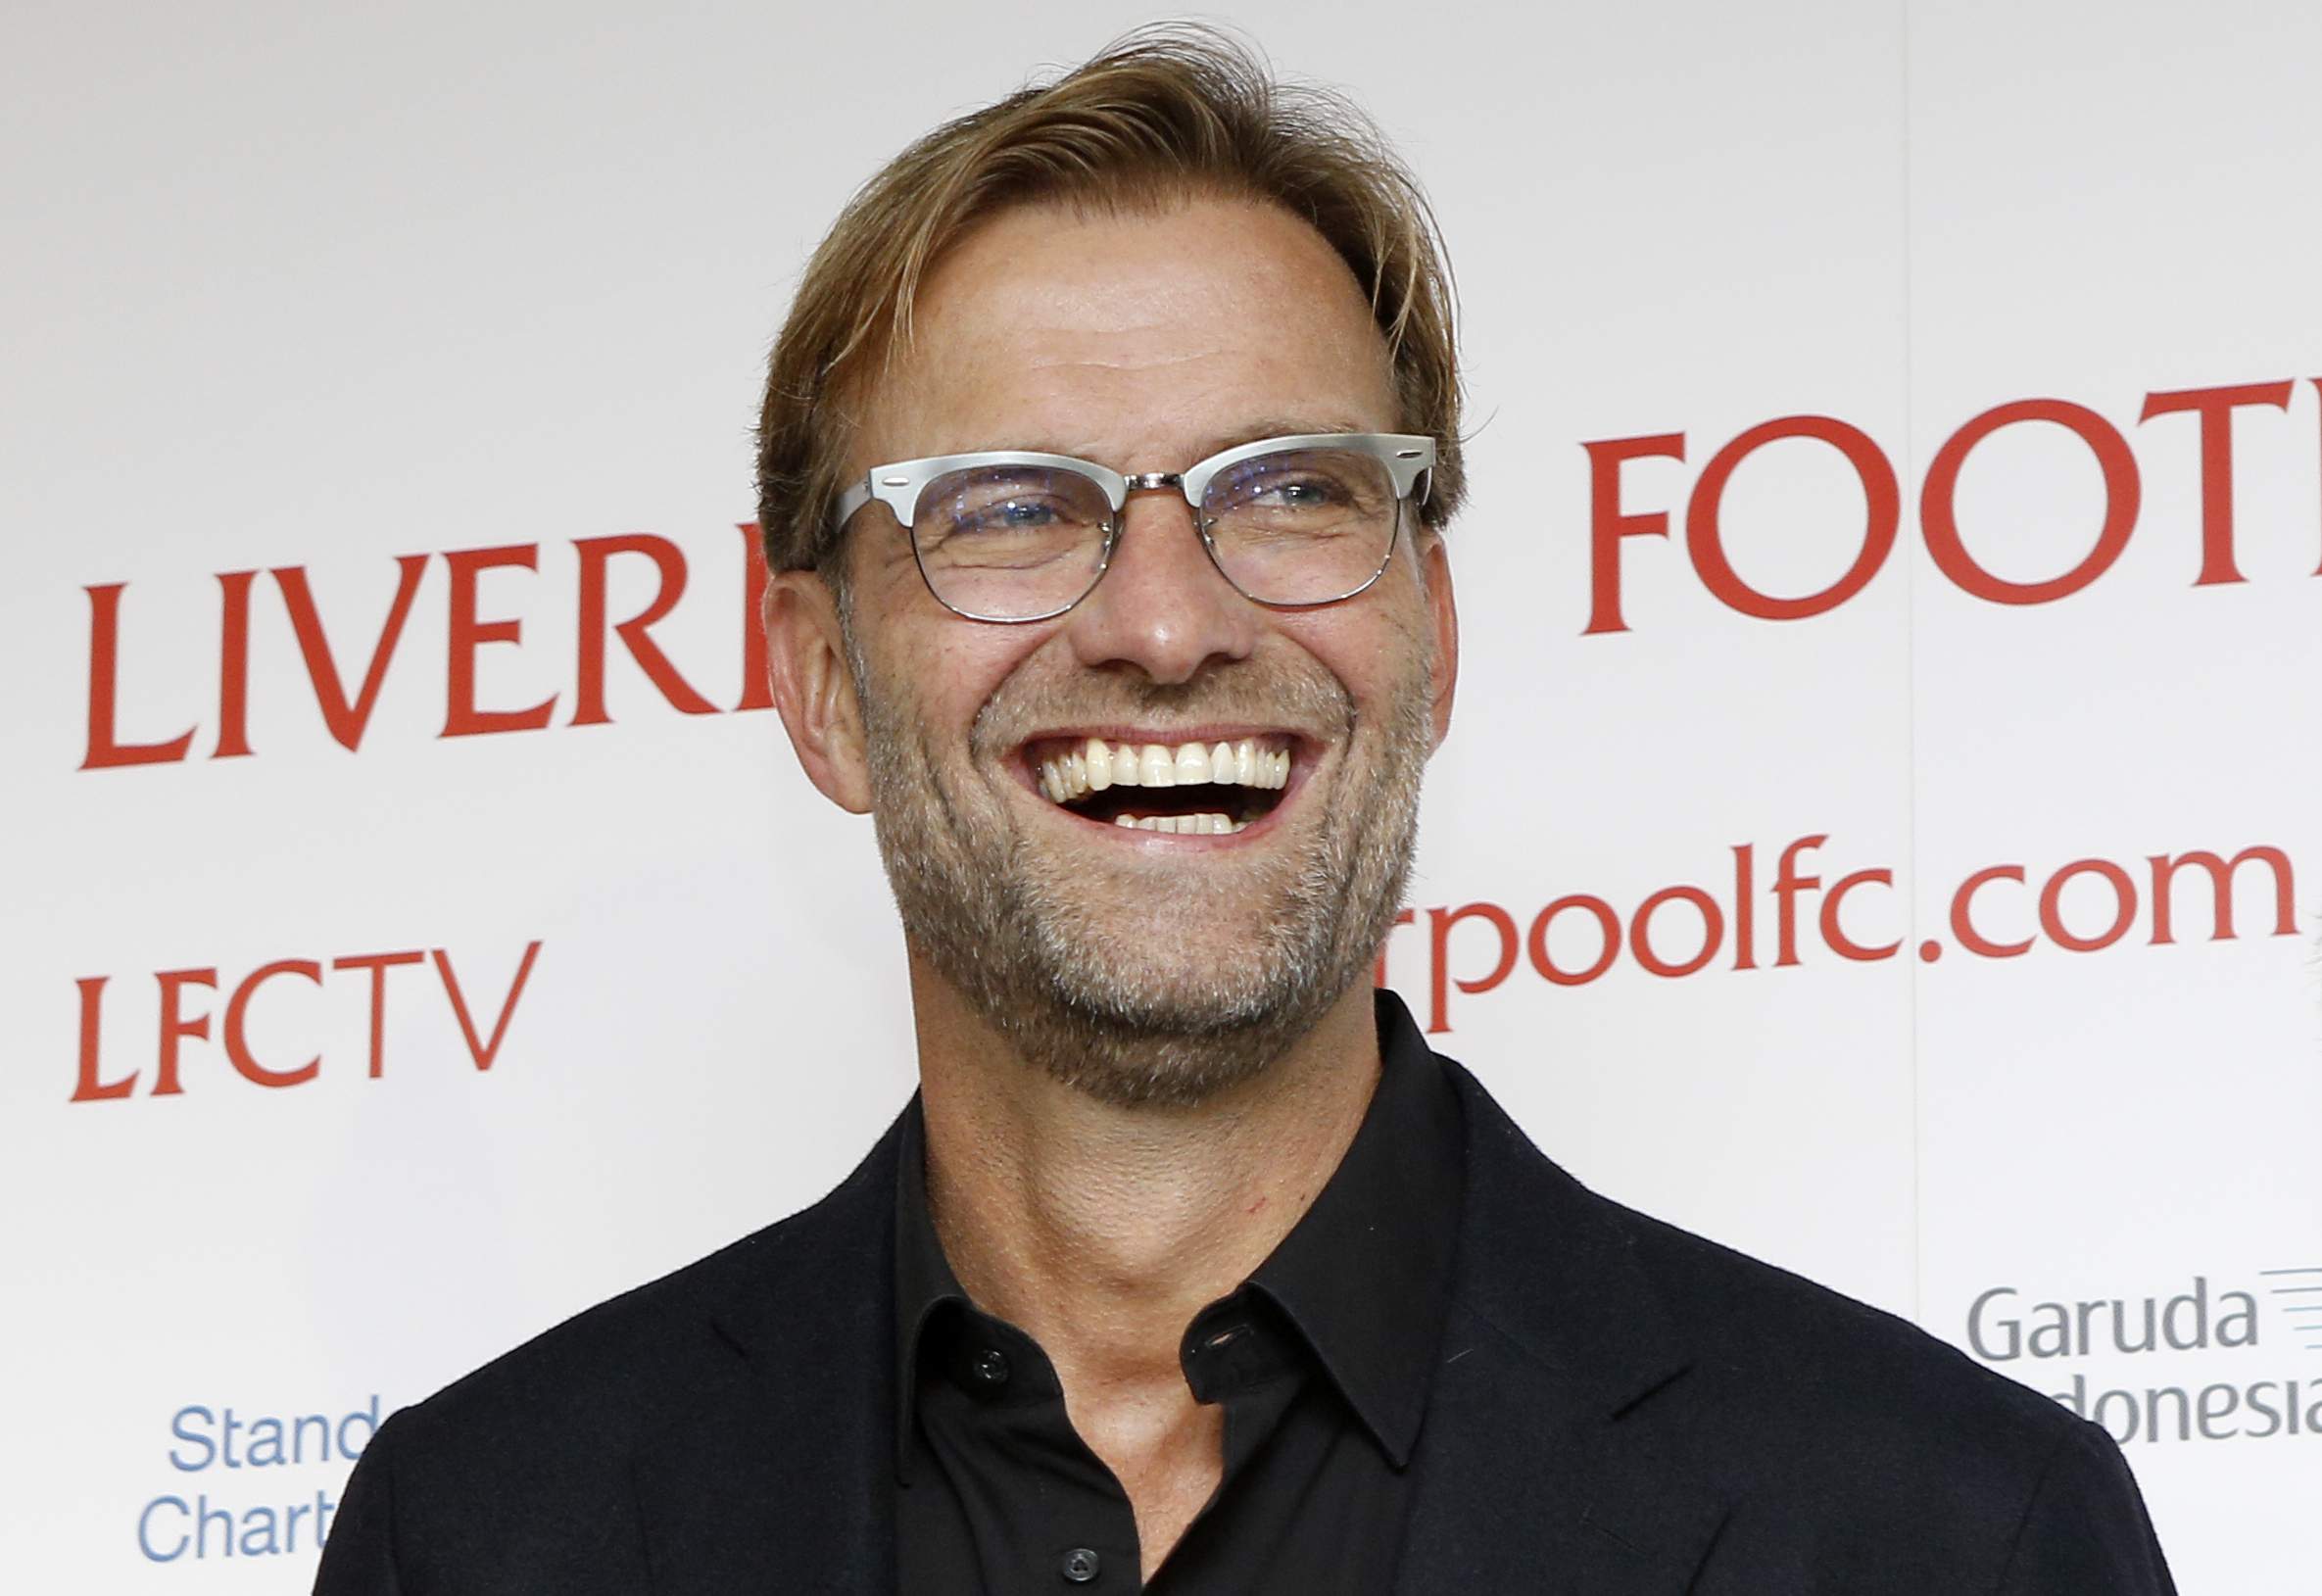 Football - Liverpool - Jurgen Klopp Press Conference - Anfield - 9/10/15 New Liverpool manager Jurgen Klopp poses before the press conference  Action Images via Reuters / Craig Brough Livepic EDITORIAL USE ONLY.